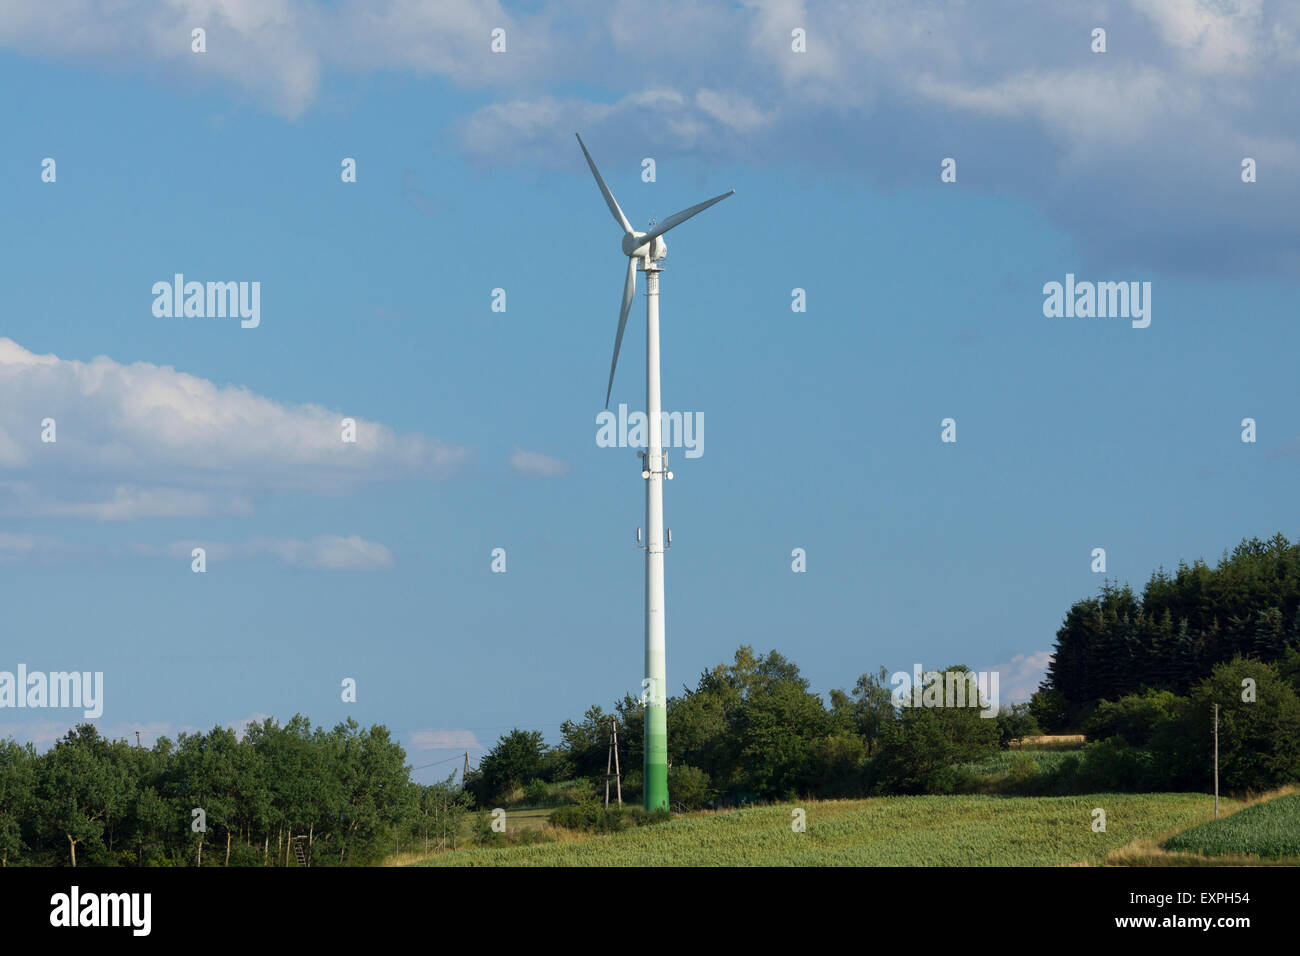 A single wind turbine in Lower Austria, Europe. Theme: renewable energy, green energy, wind energy, sustainable, non-polluting, electricity generation Stock Photo